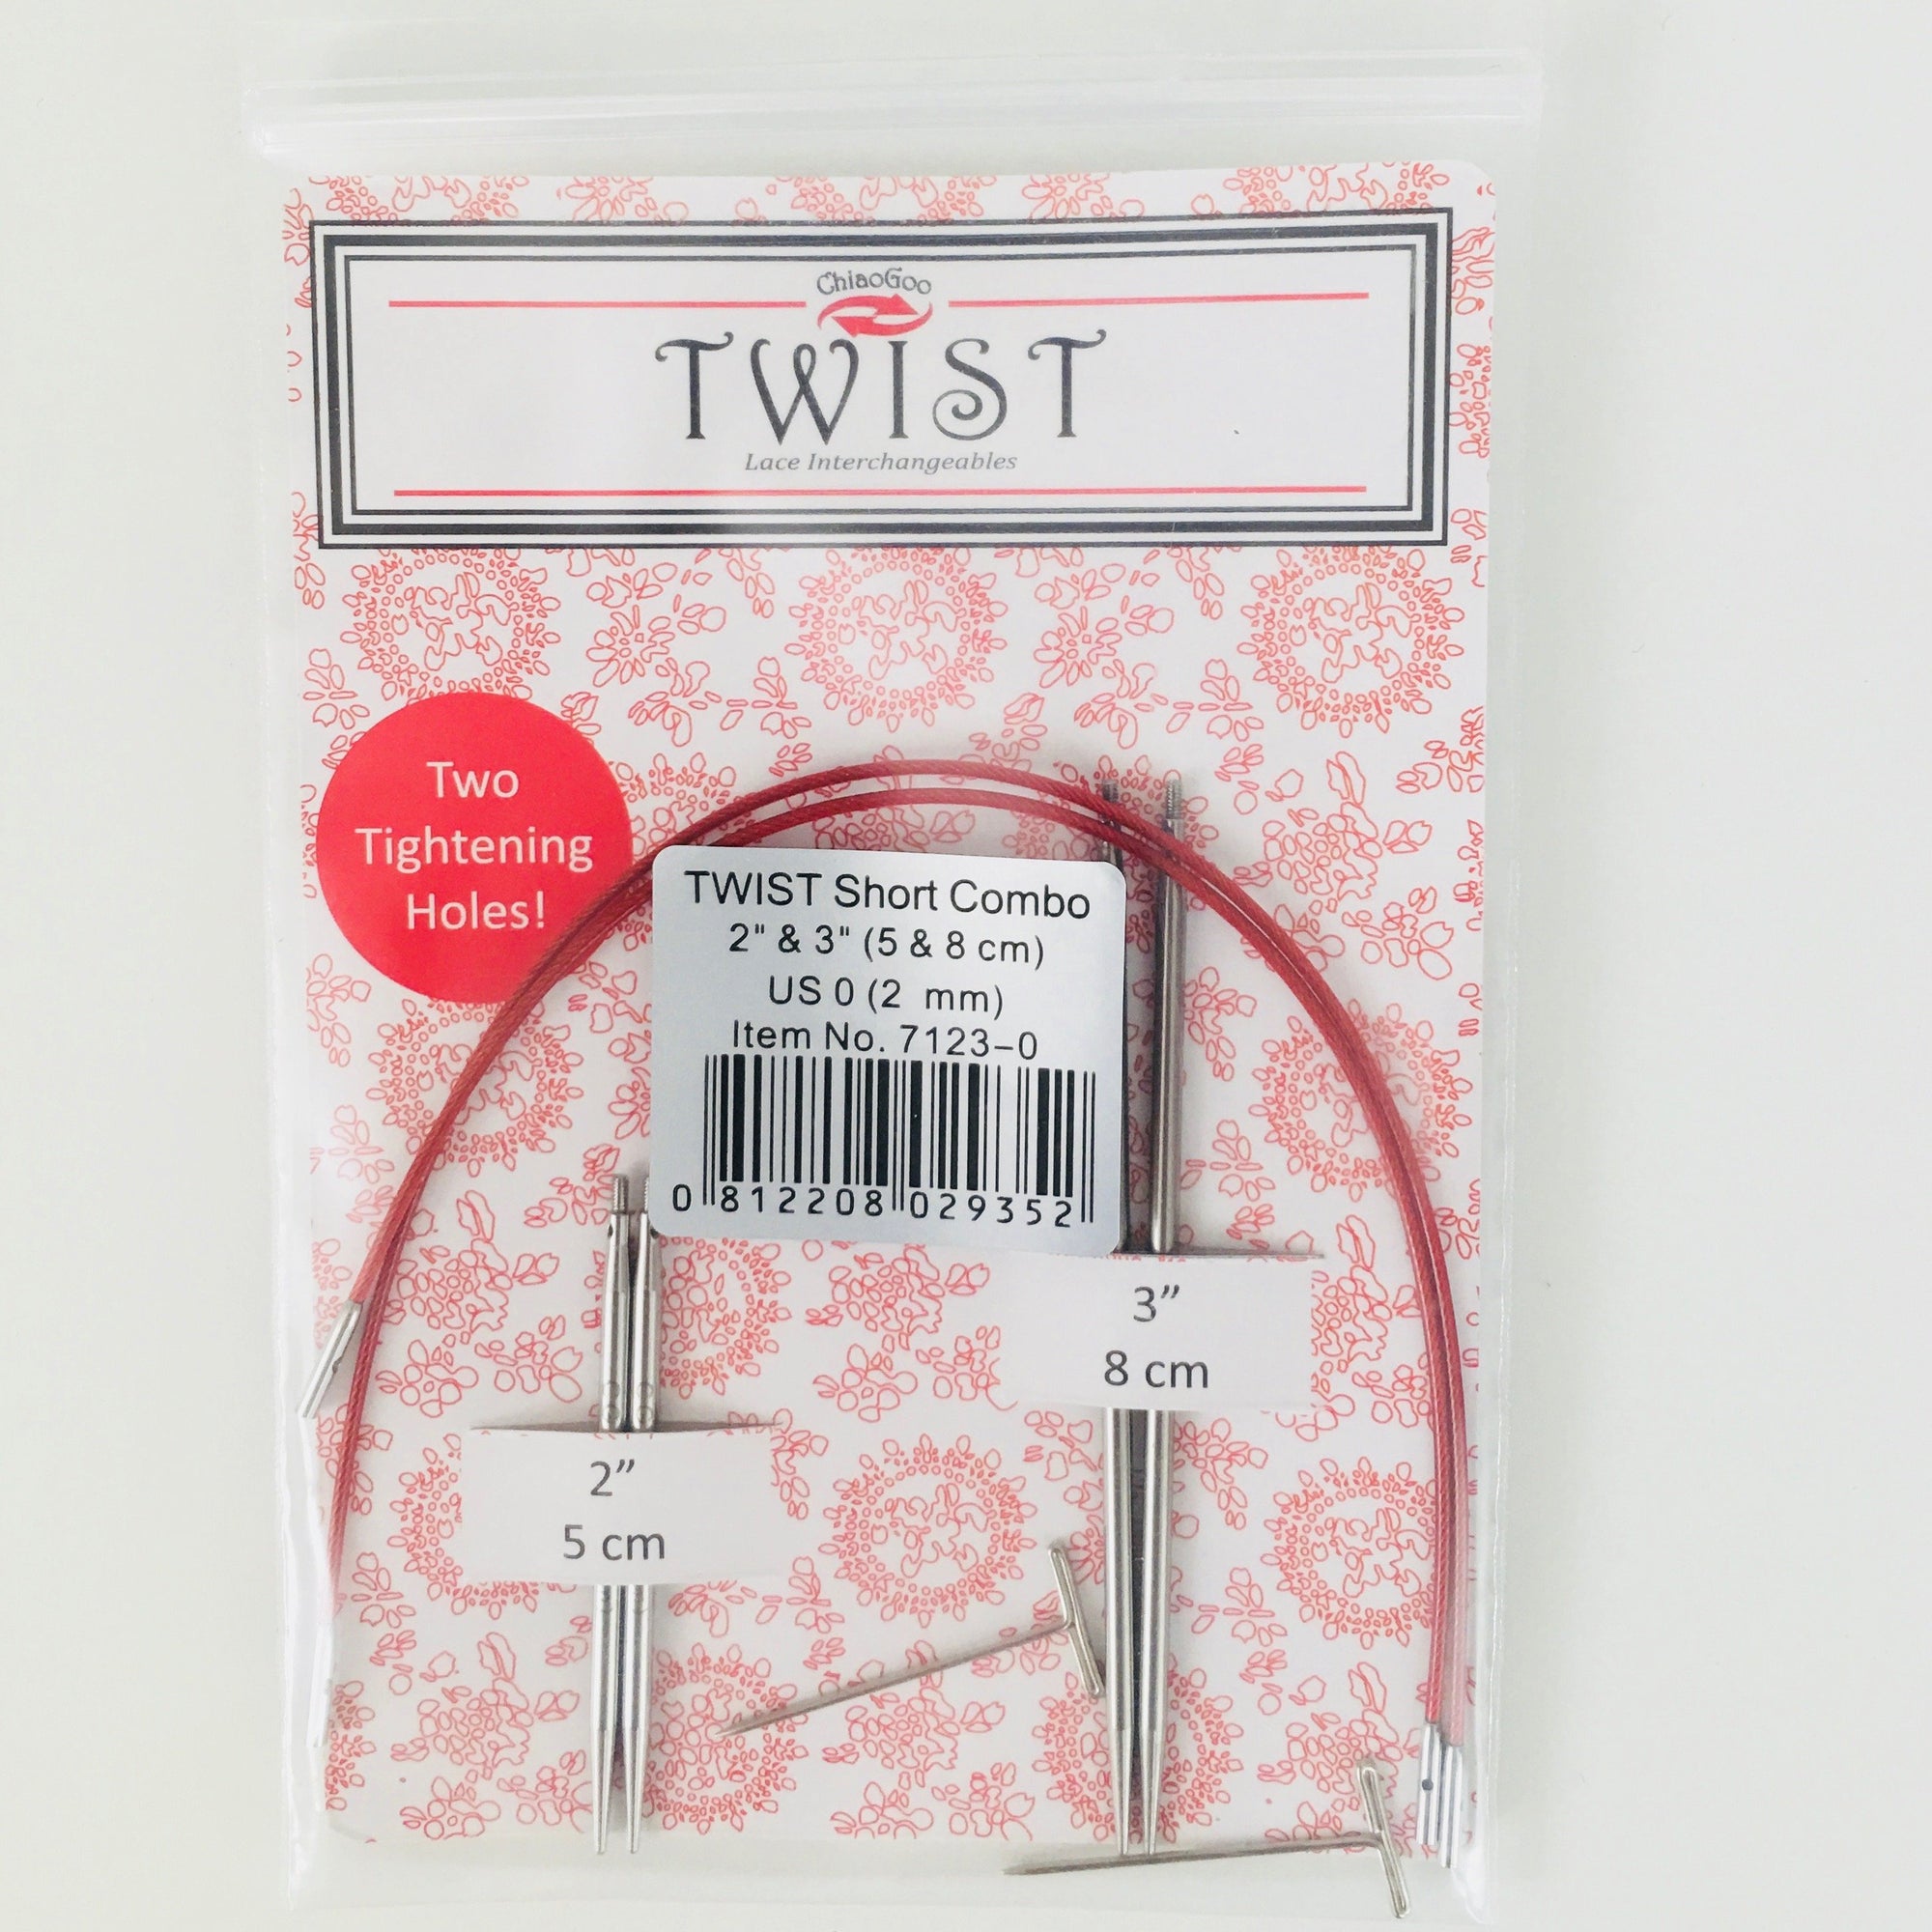 ChiaoGoo TWIST 3 inch (8 cm) Shorties Stainless Steel Lace IC Tips